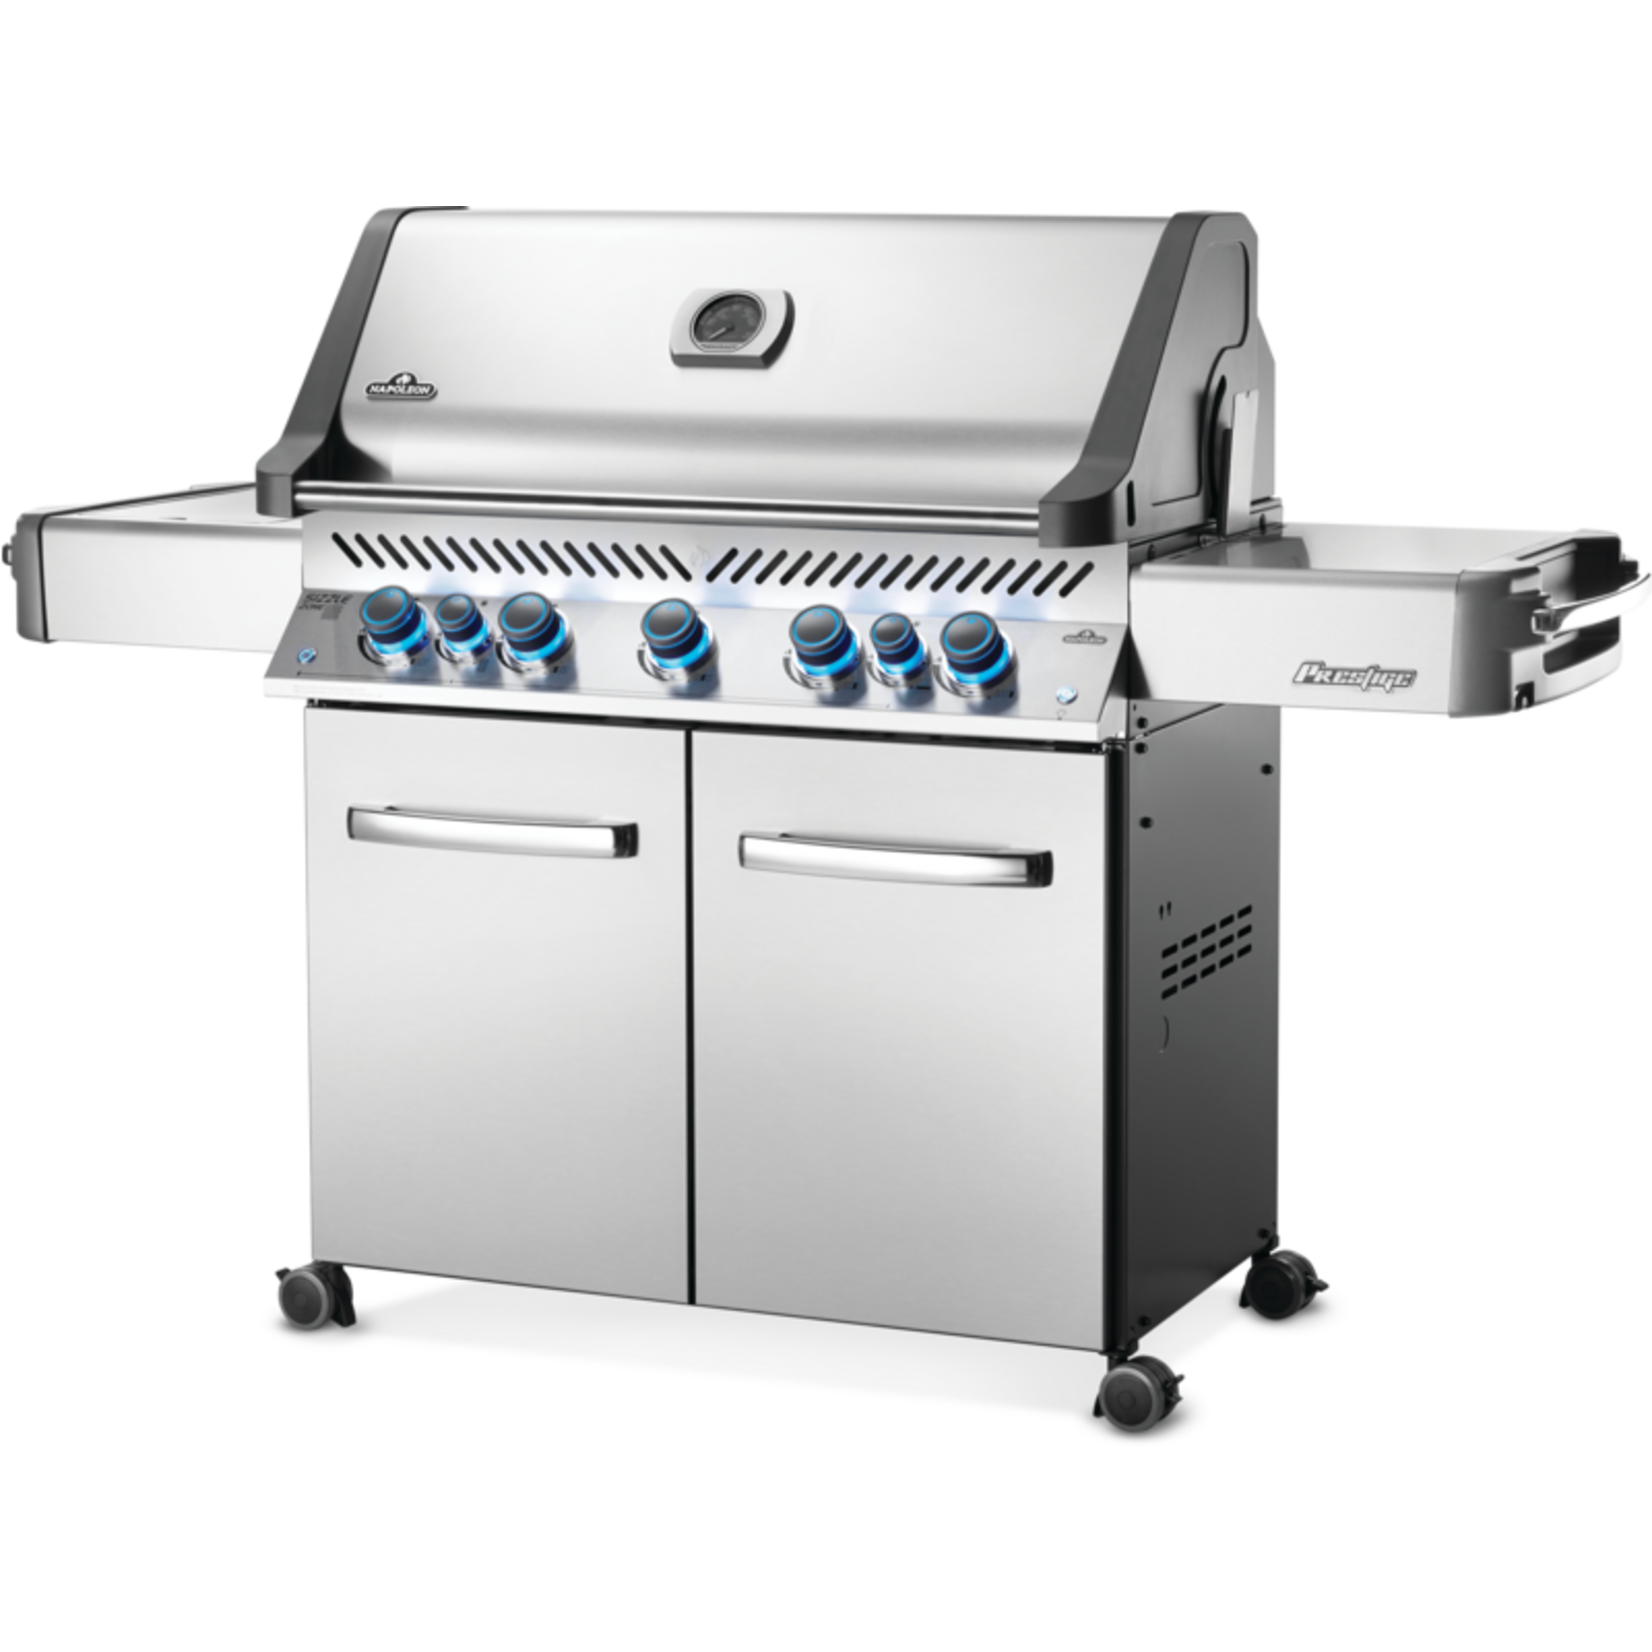 Napoleon Prestige® 665 Natural Gas Grill with Infrared Side and Rear Burners, Stainless Steel ($125 Instant Rebate)